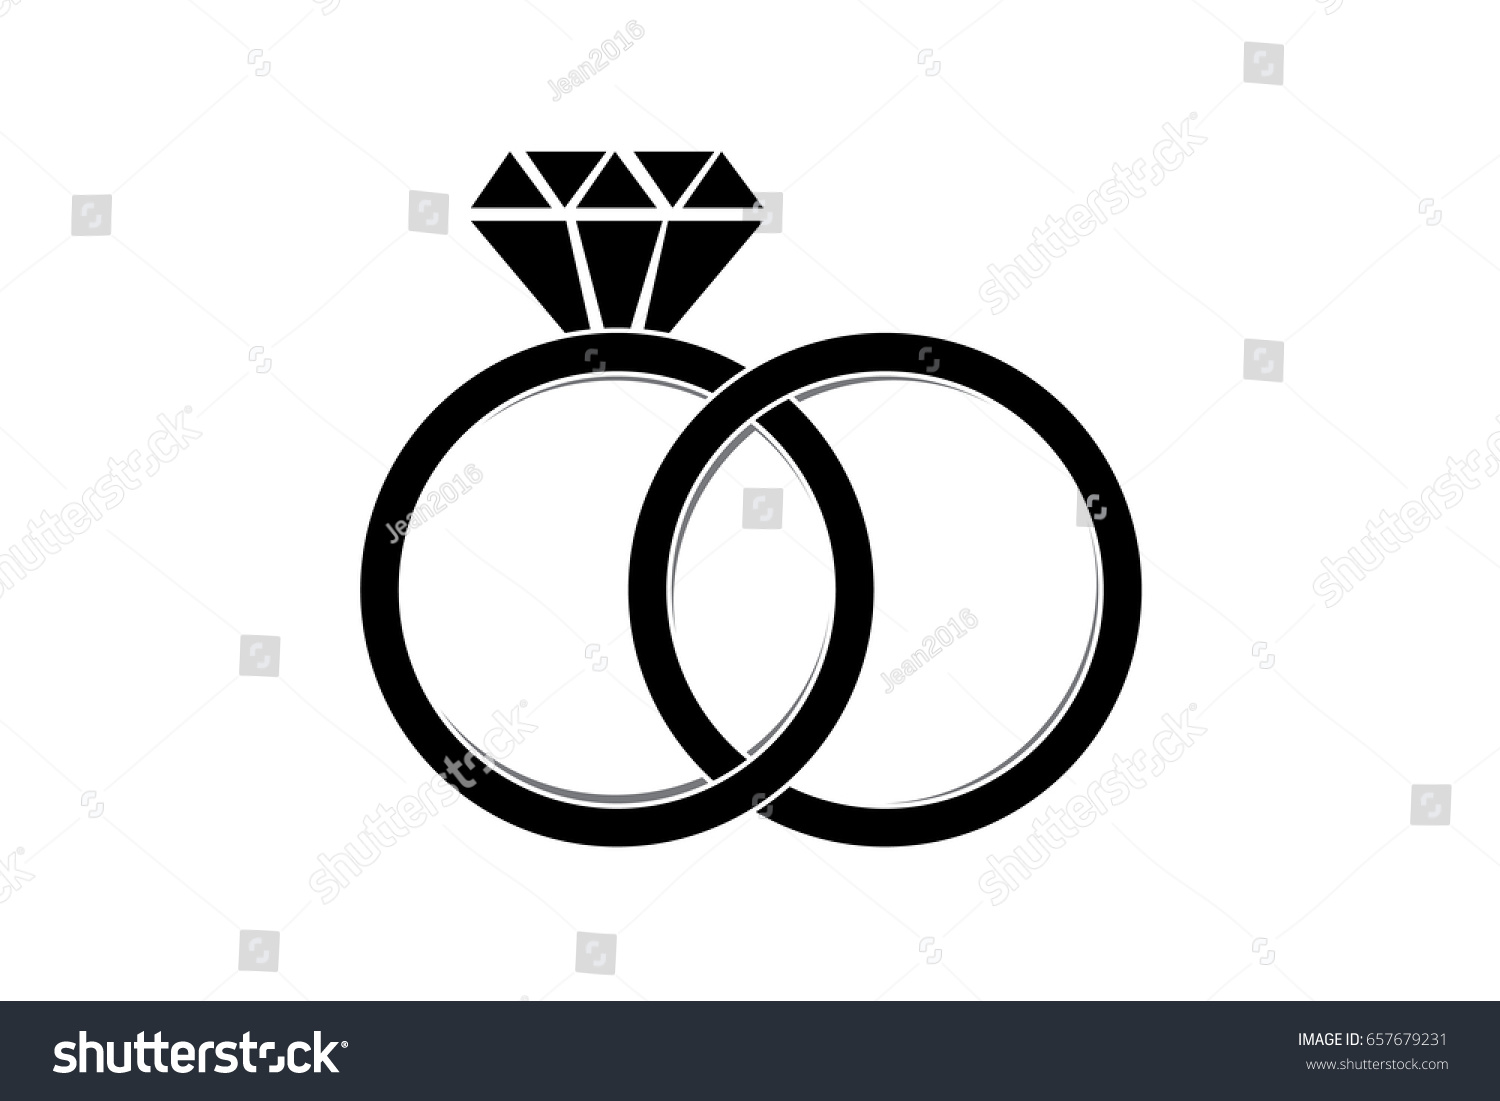 Marriage Icon Two Bonded Wedding Rings Stock Vector 657679231 ...